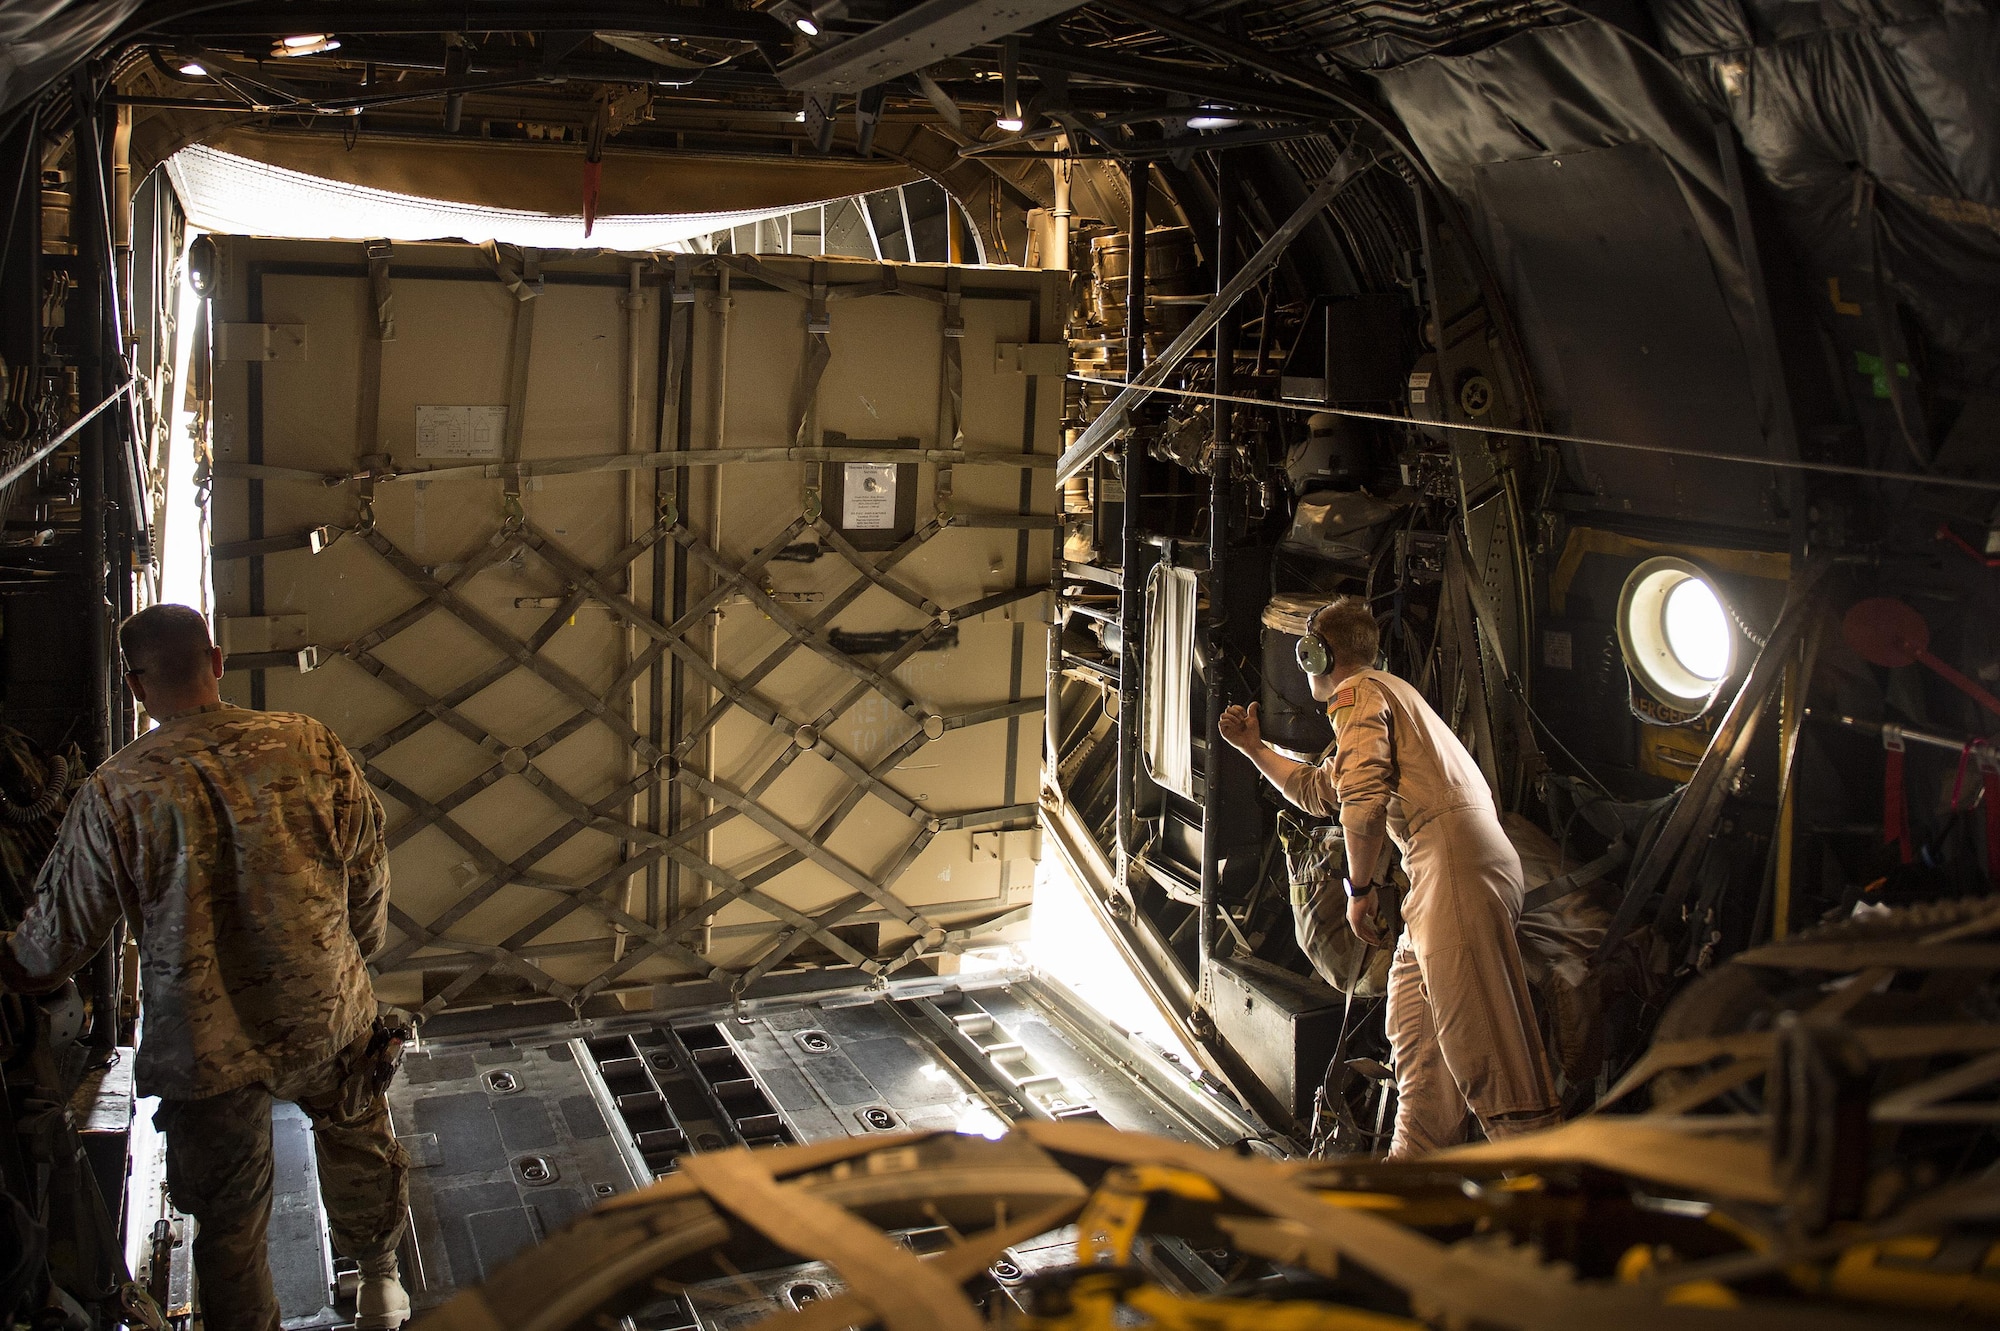 Senior Airman Zac Sidders, 774th Expeditionary Airlift Squadron C-130 Hercules loadmaster, marshals in a "tricon" shipping container at Forward Operating Base Sharana, Paktika province, Afghanistan, Sept. 28, 2013. This mission marked a retrograde milestone as the 774th EAS transported the last cargo from FOB Sharana before the base is transferred to the Afghan Ministry of Defense. Sidders, a Peoria, Ill., native, is deployed from the Wyoming Air National Guard. 